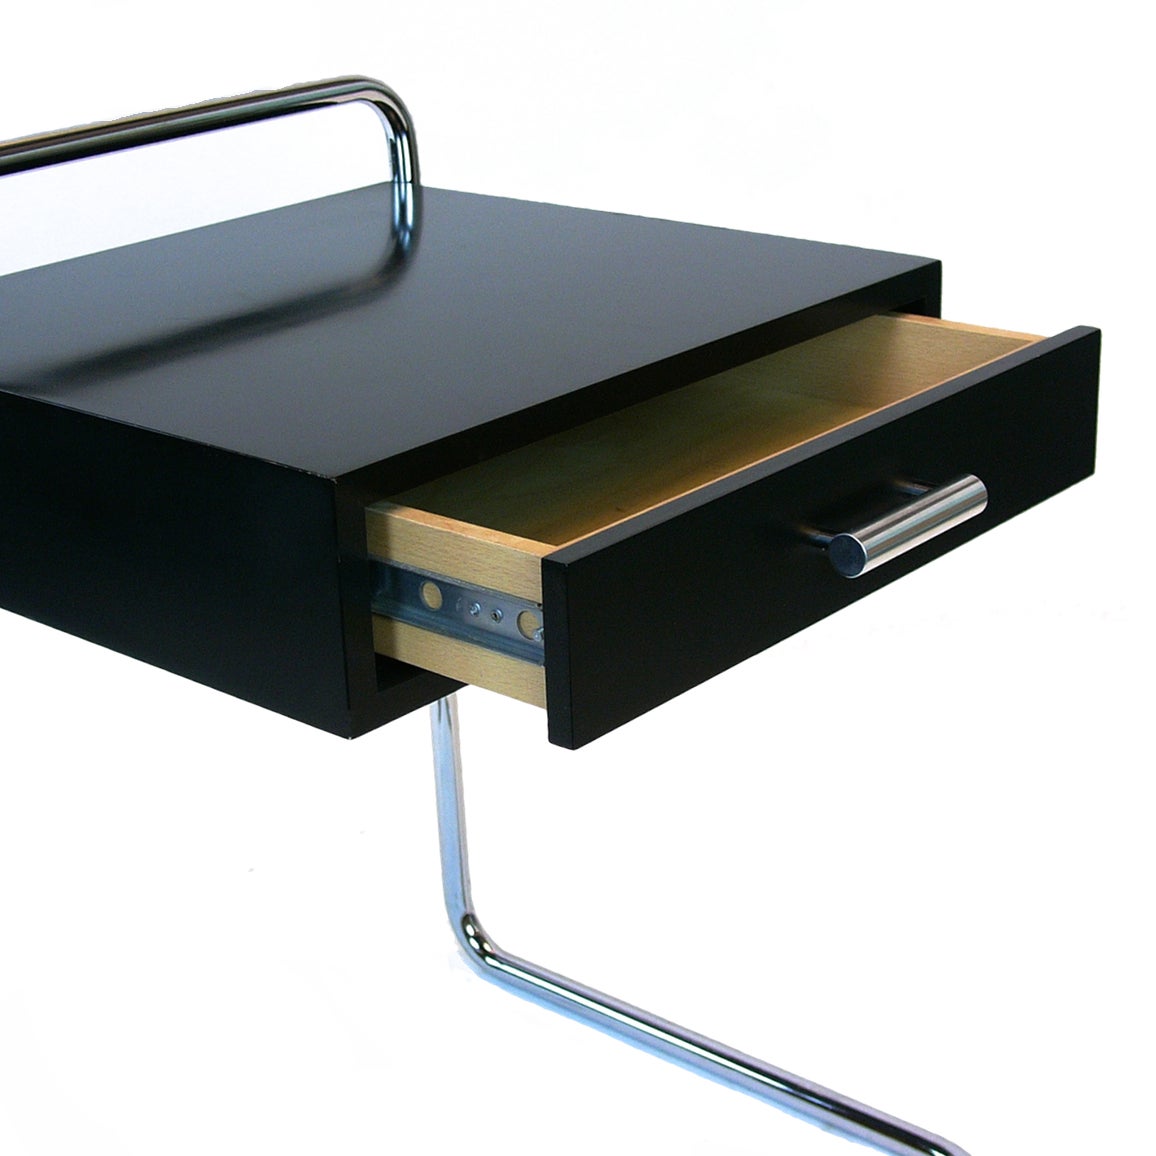 A Marcel Breuer Bauhaus single drawer night stand by ICF in black.